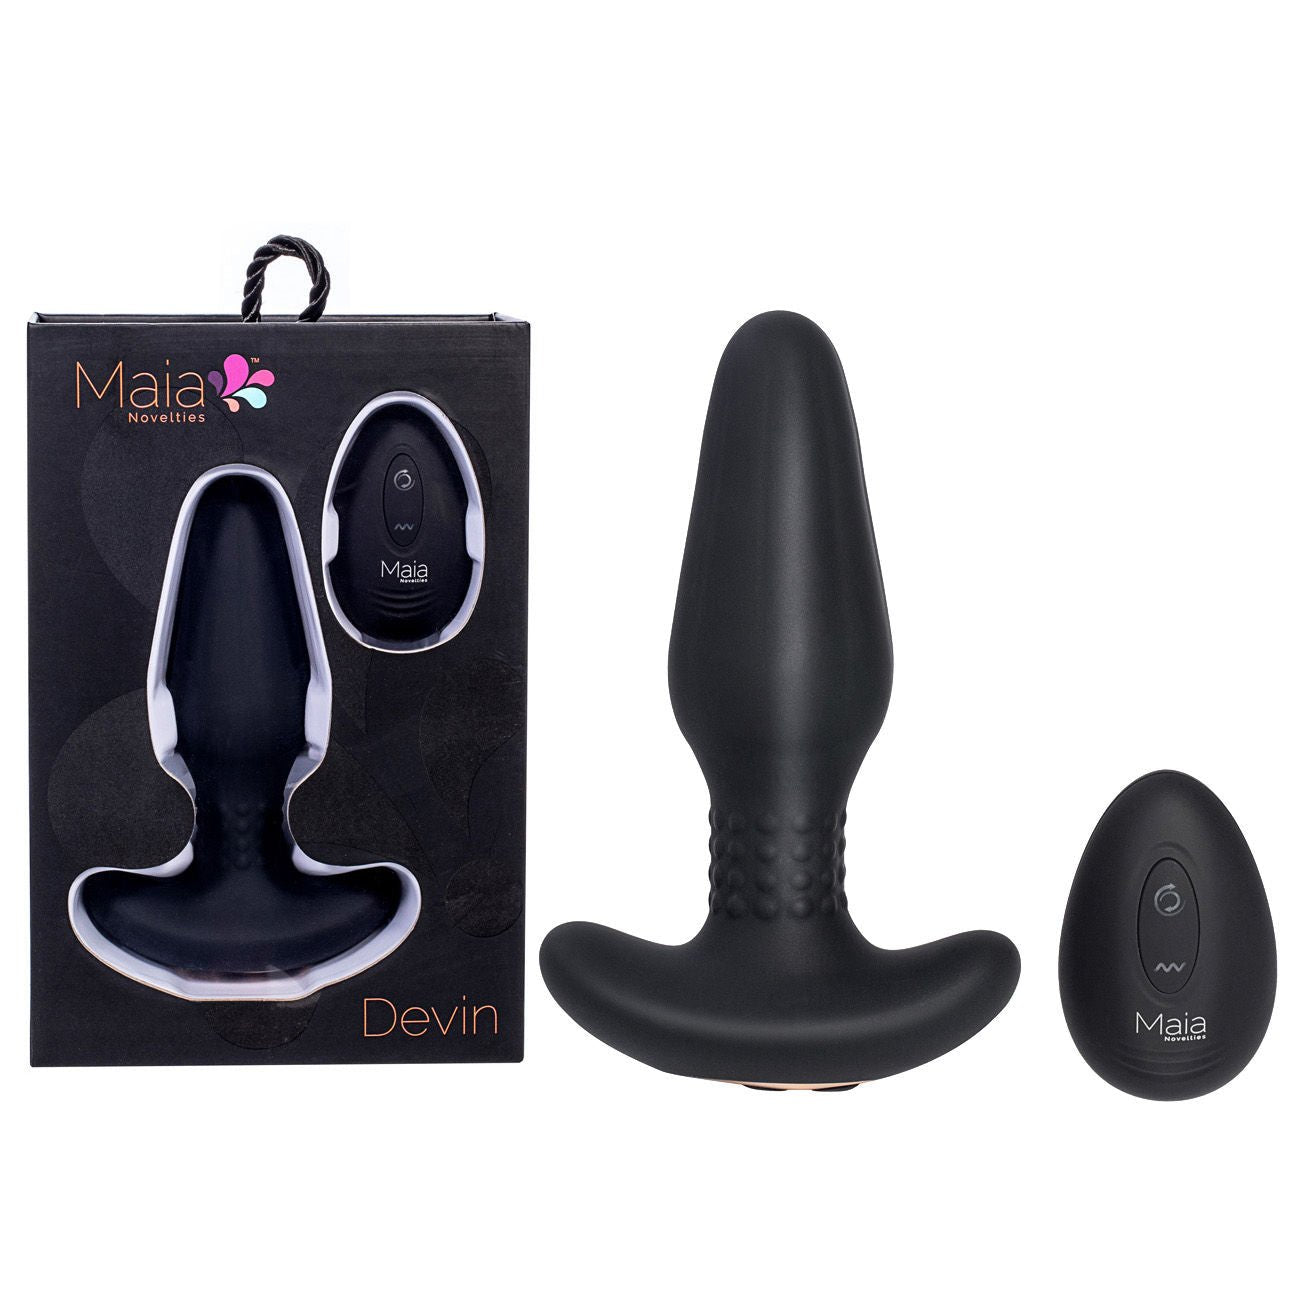 Maia - devin - remote control vibrating butt plug - Product front view and box front view | Flirtybay.com.au